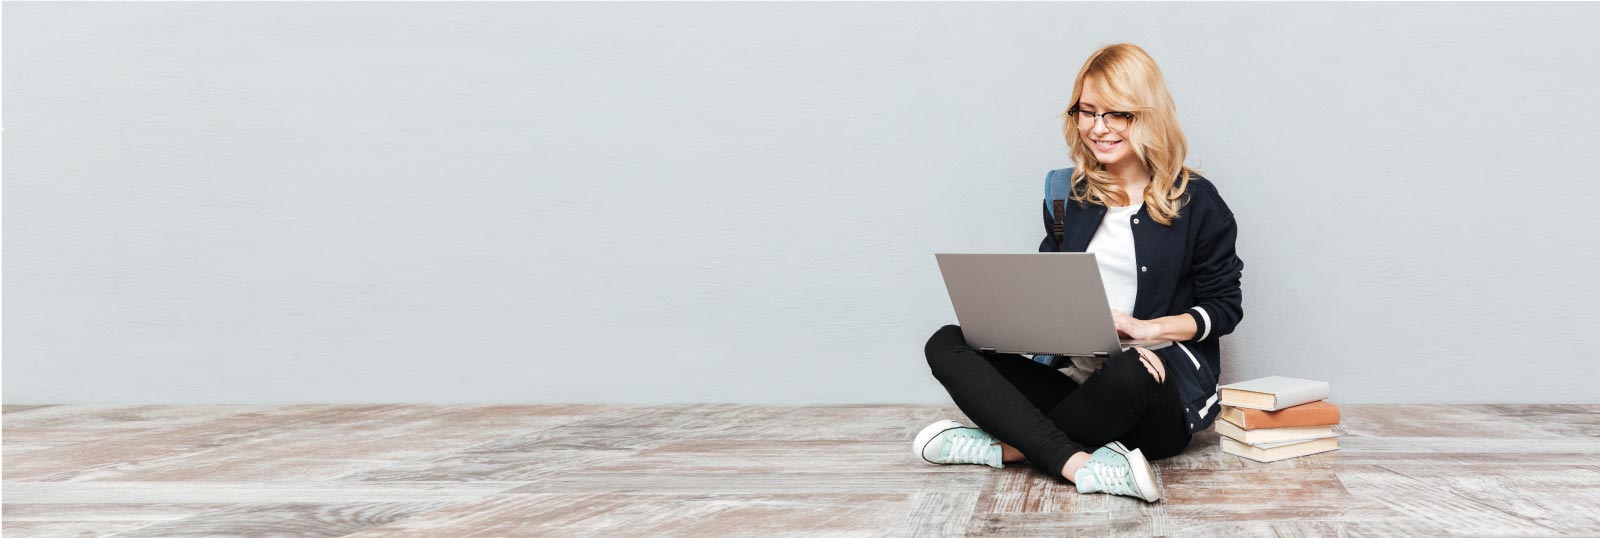 Blonde girl sitting on floor with laptop